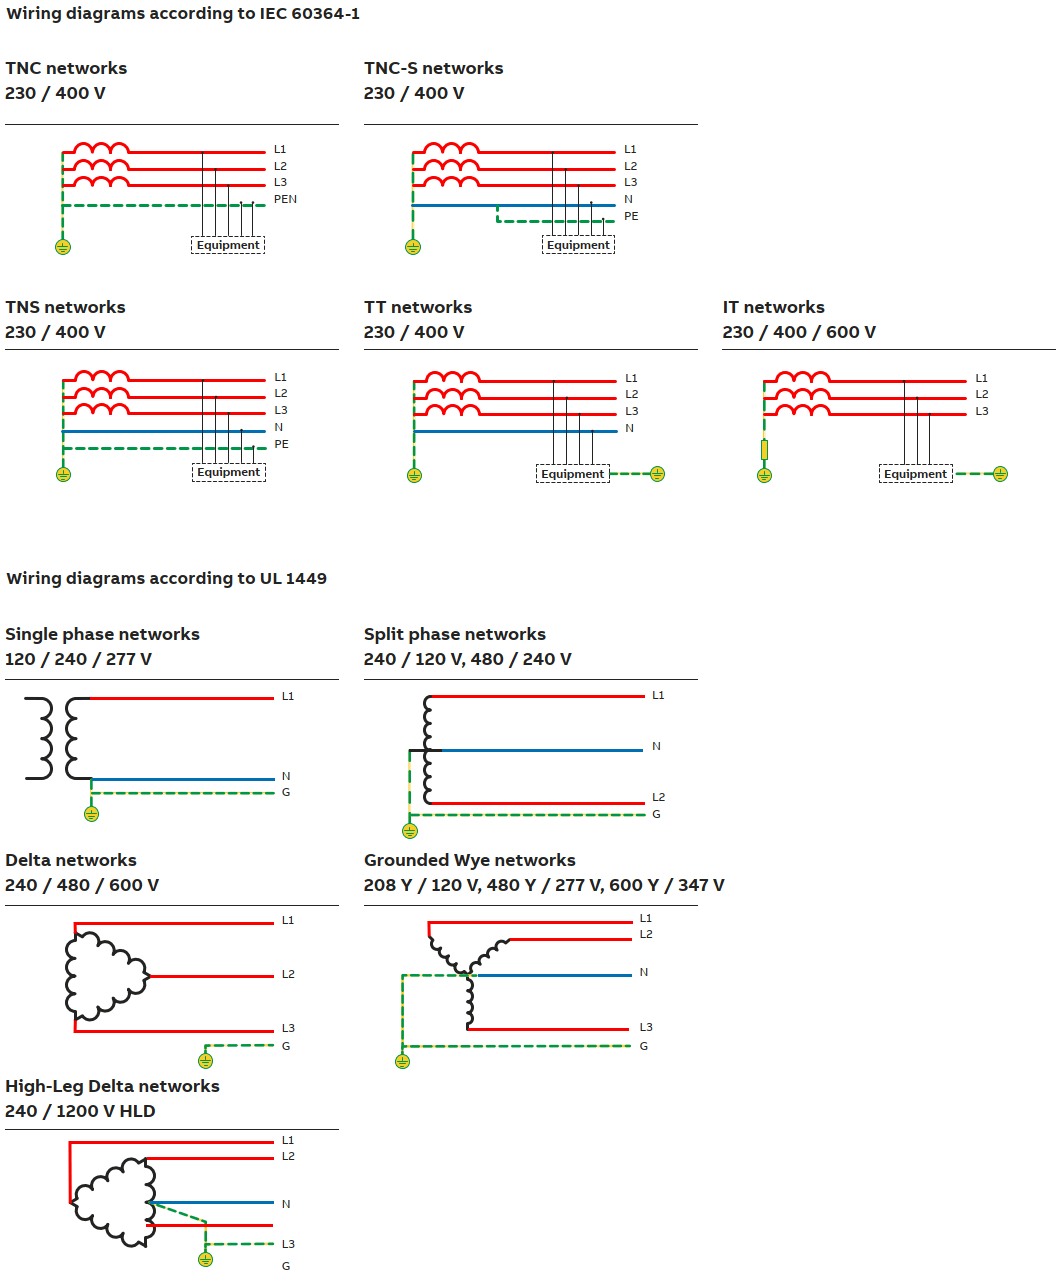 Wiring diagrams according to IEC and UL